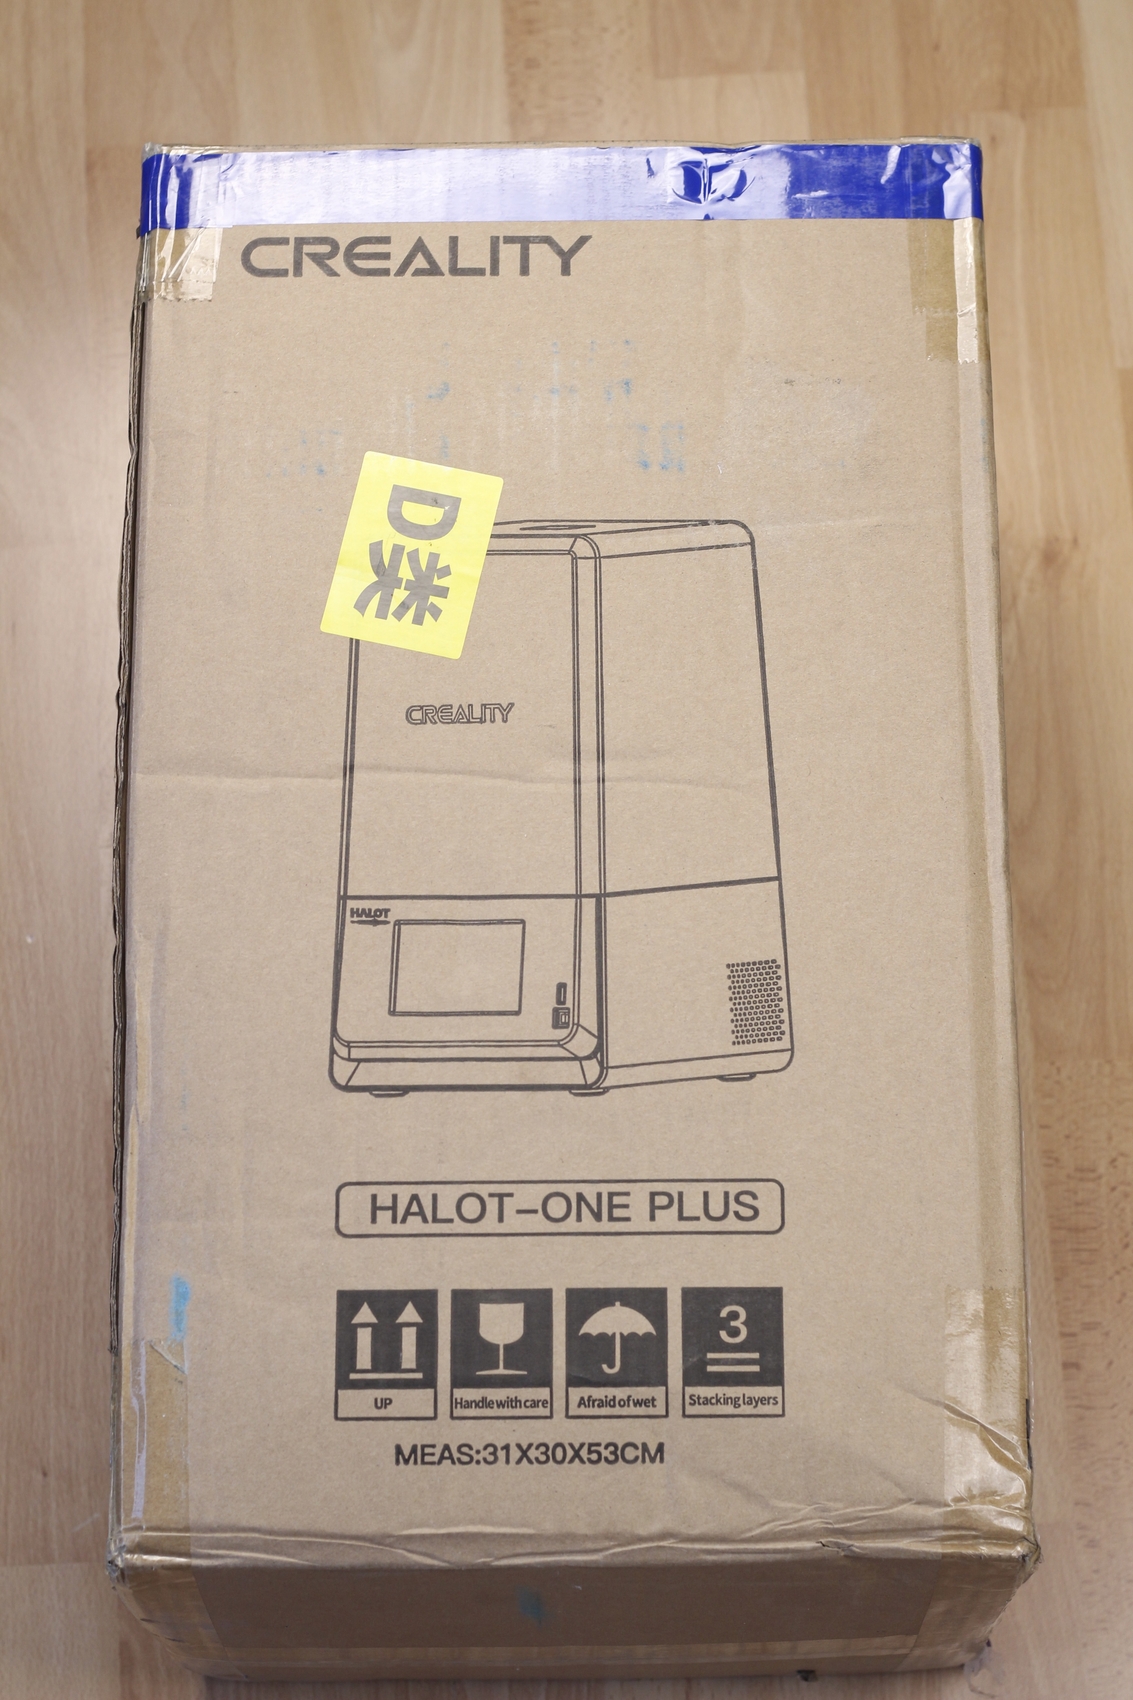 Creality HALOT ONE PLUS Review Packaging1 | Creality Halot One Plus Review: Worth Buying?